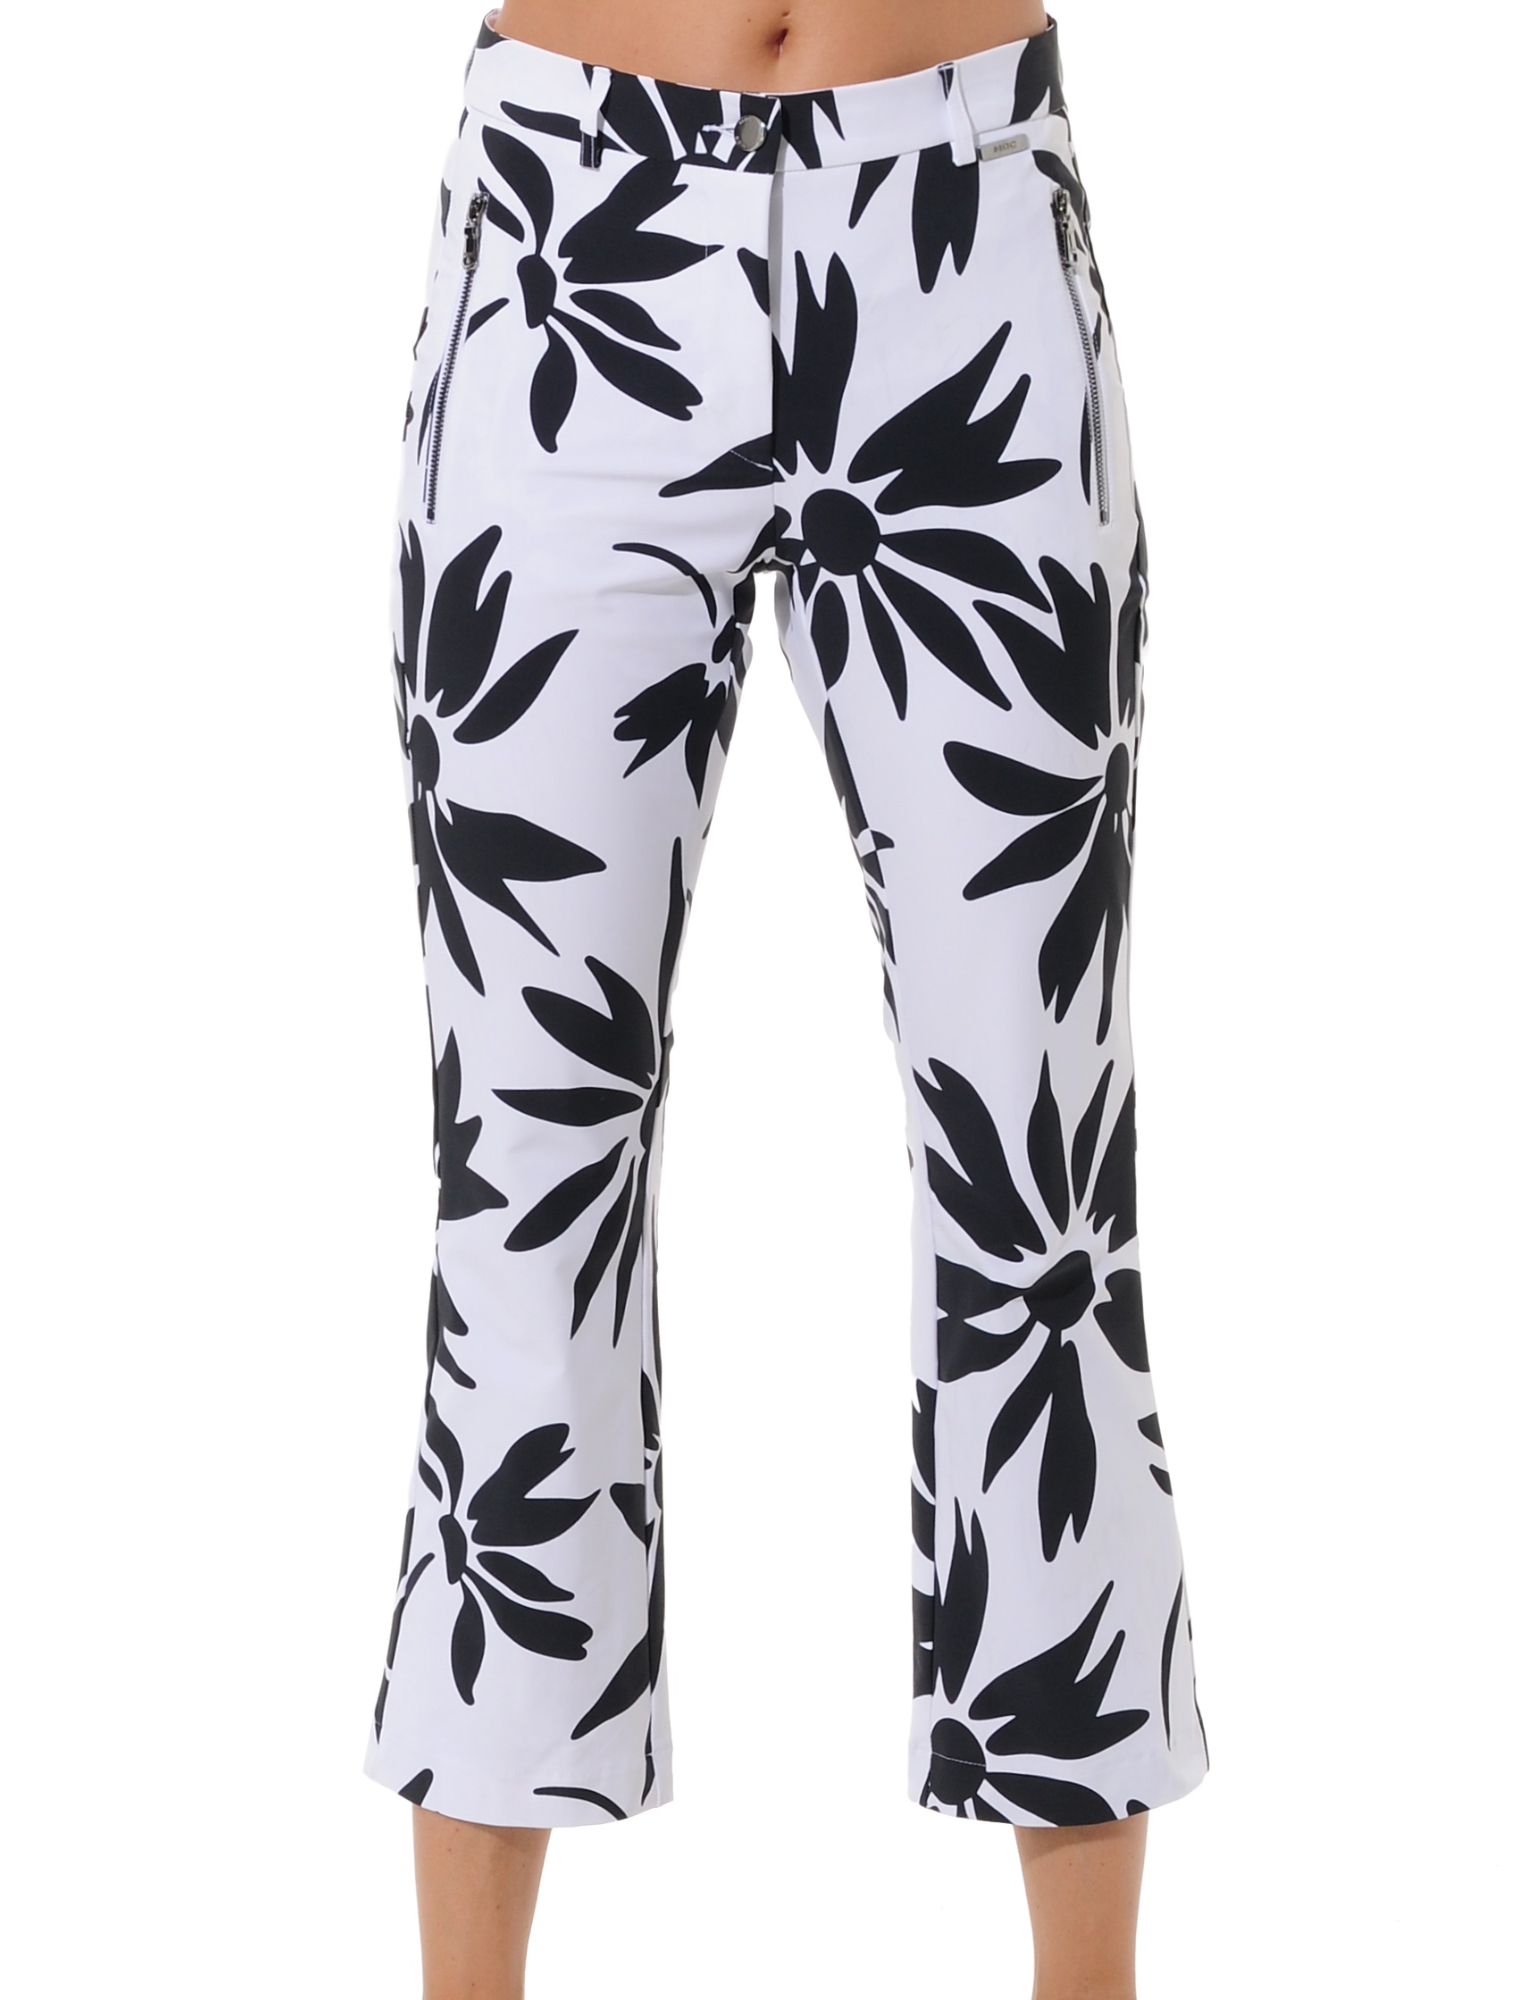 Daisies print boot cut cropped chinos black/white